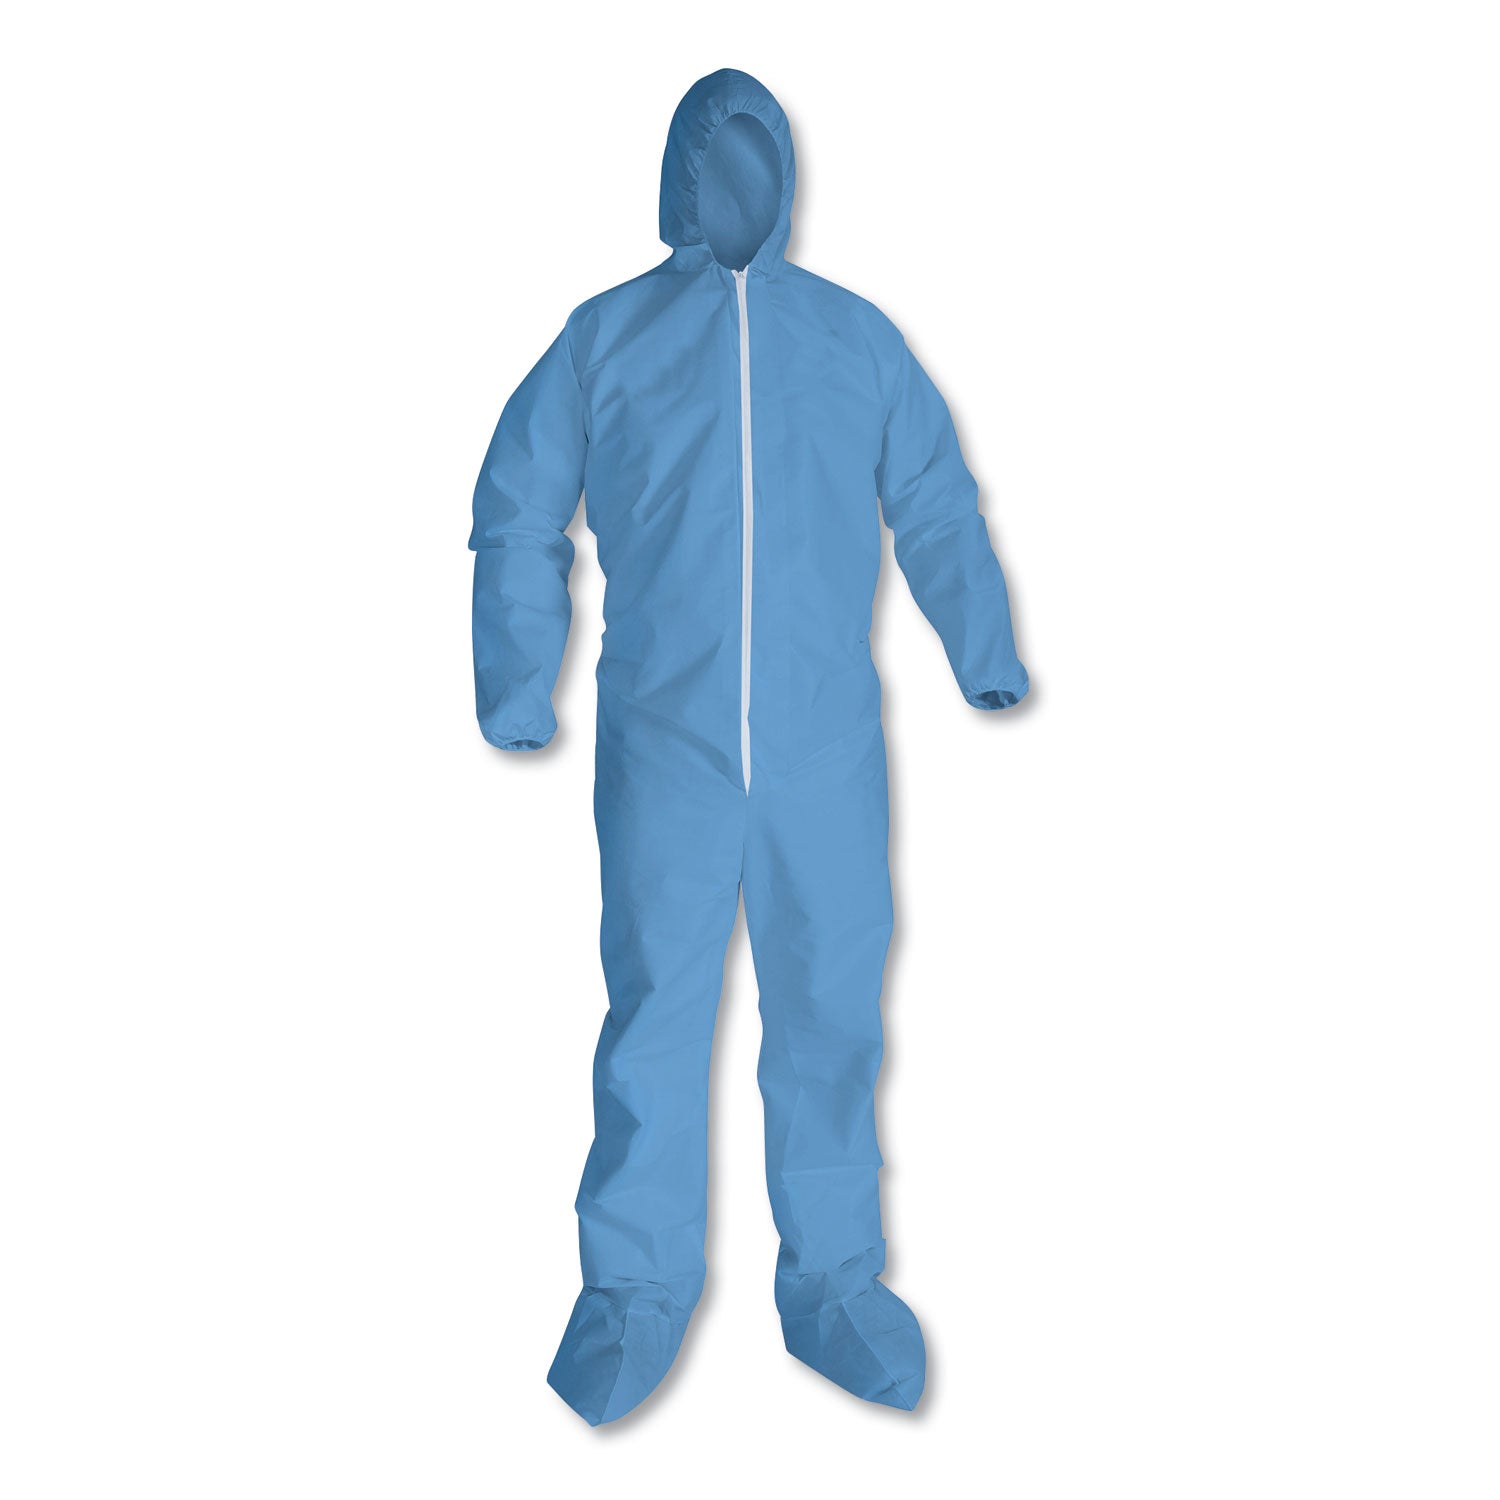 a65-zipper-front-hood-and-boot-flame-resistant-coveralls-elastic-wrist-and-ankles-x-large-blue-25-carton_kcc45354 - 1